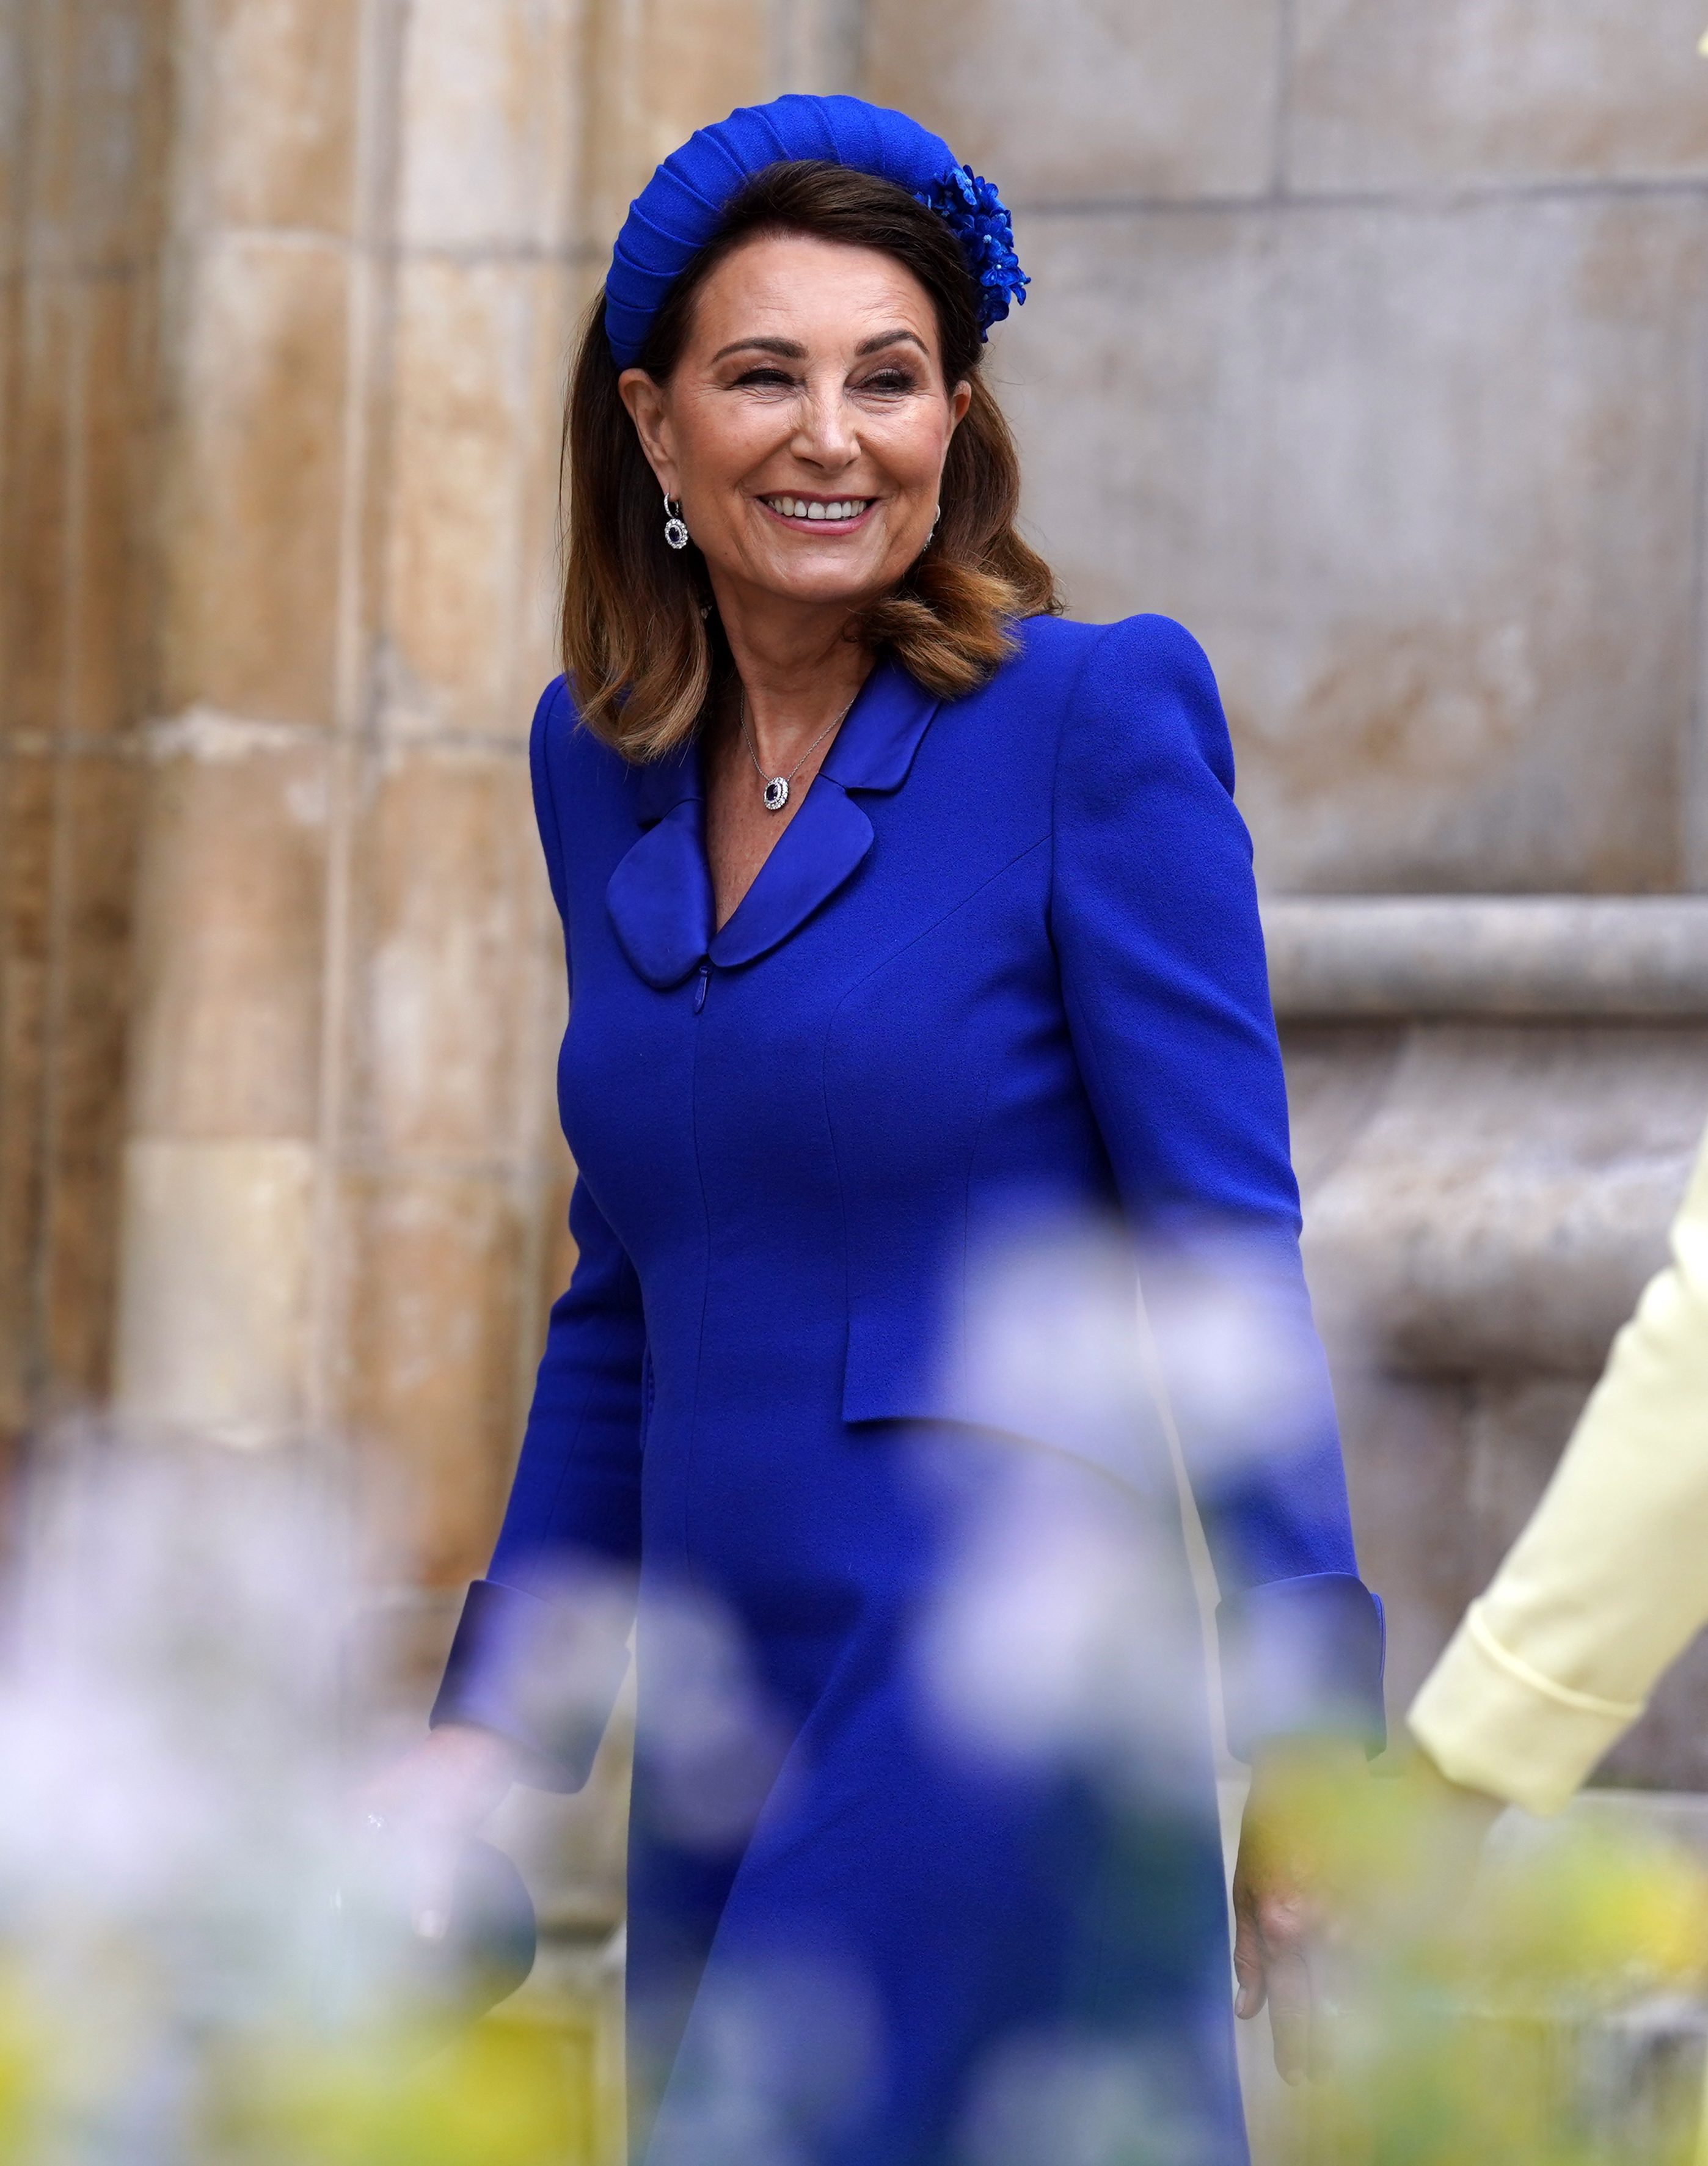 Carole Middleton arrives at the Coronation of King Charles III and Queen Camilla in London, England, on May 6, 2023. | Source: Getty Images